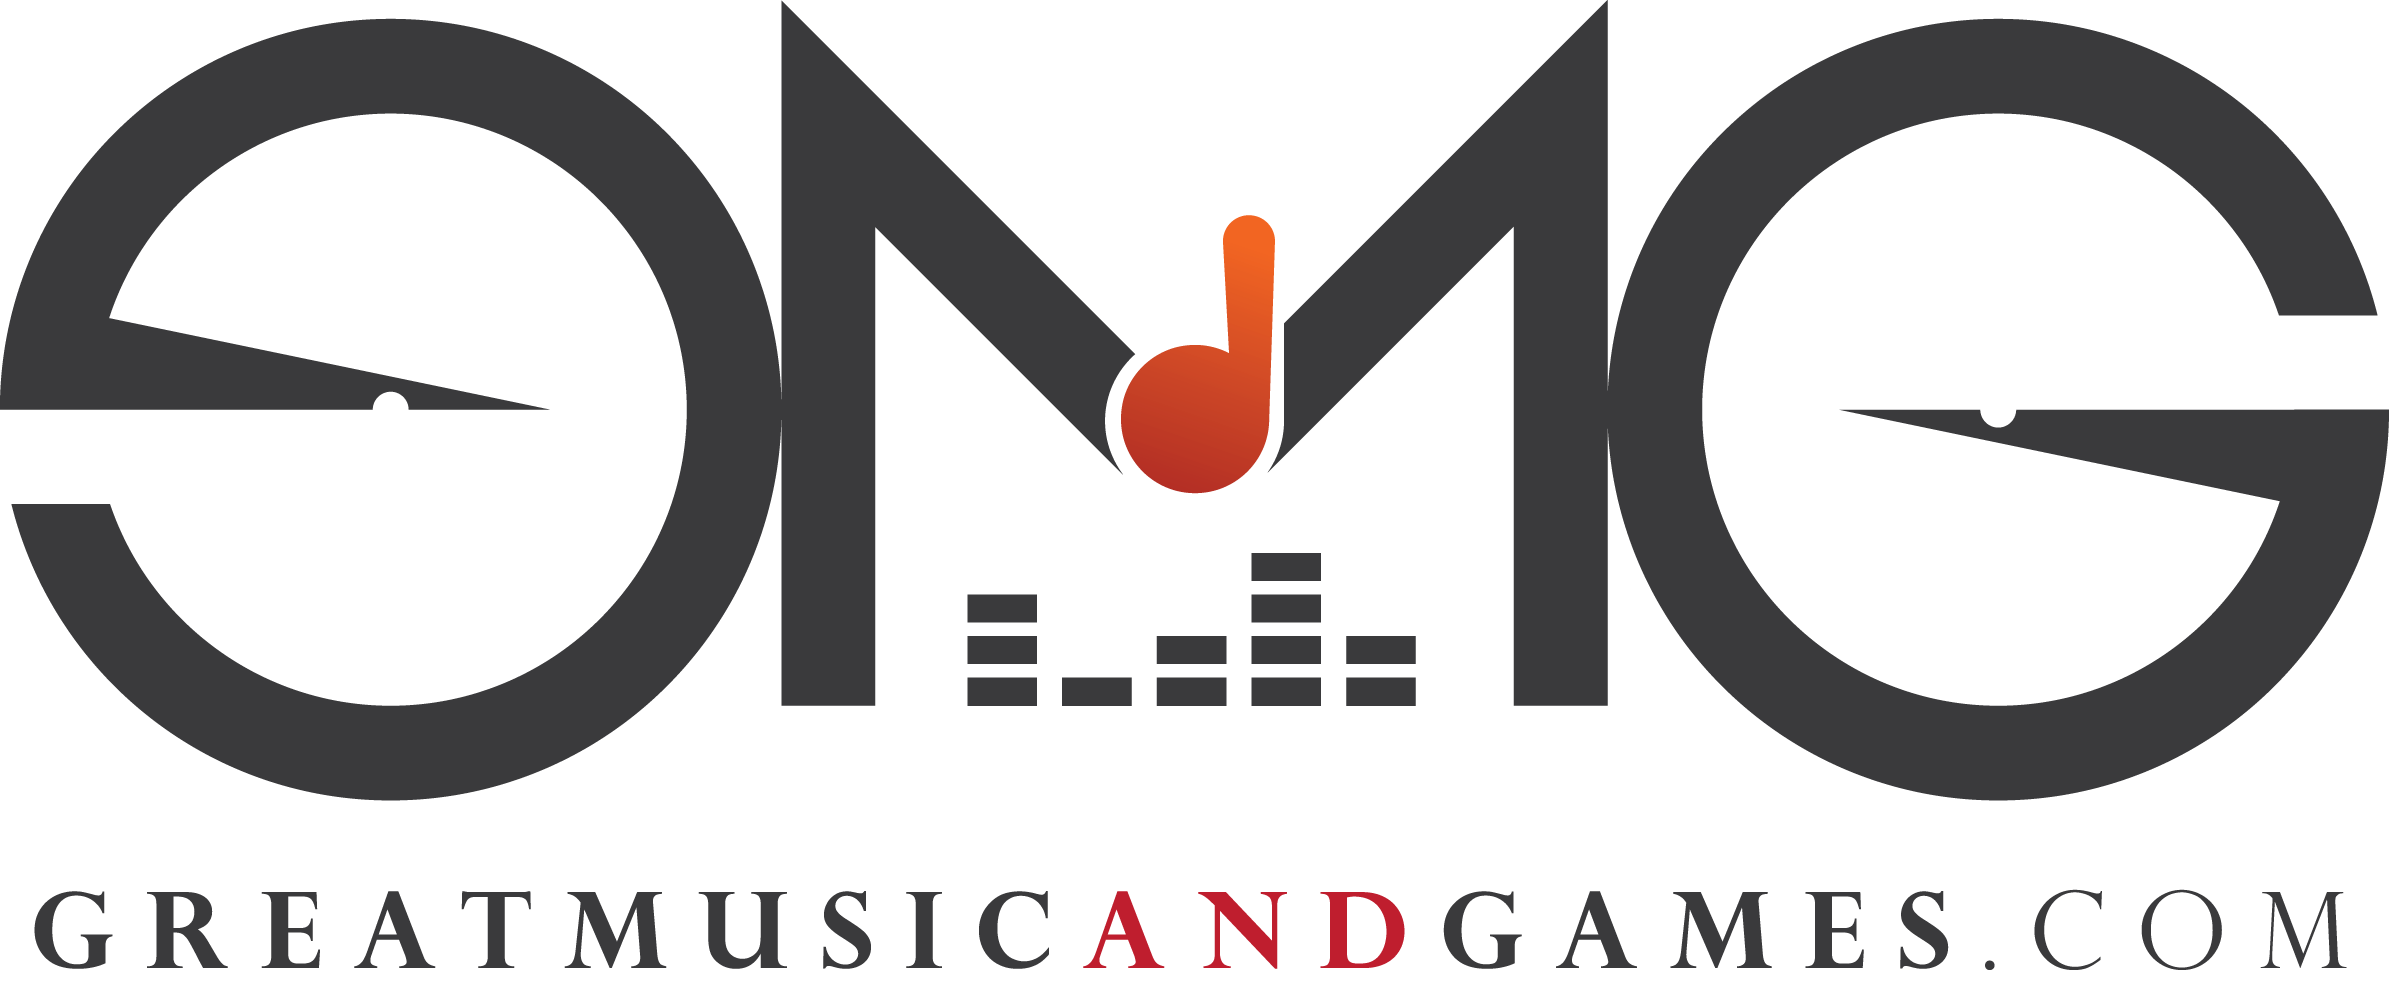 Great Music & Games